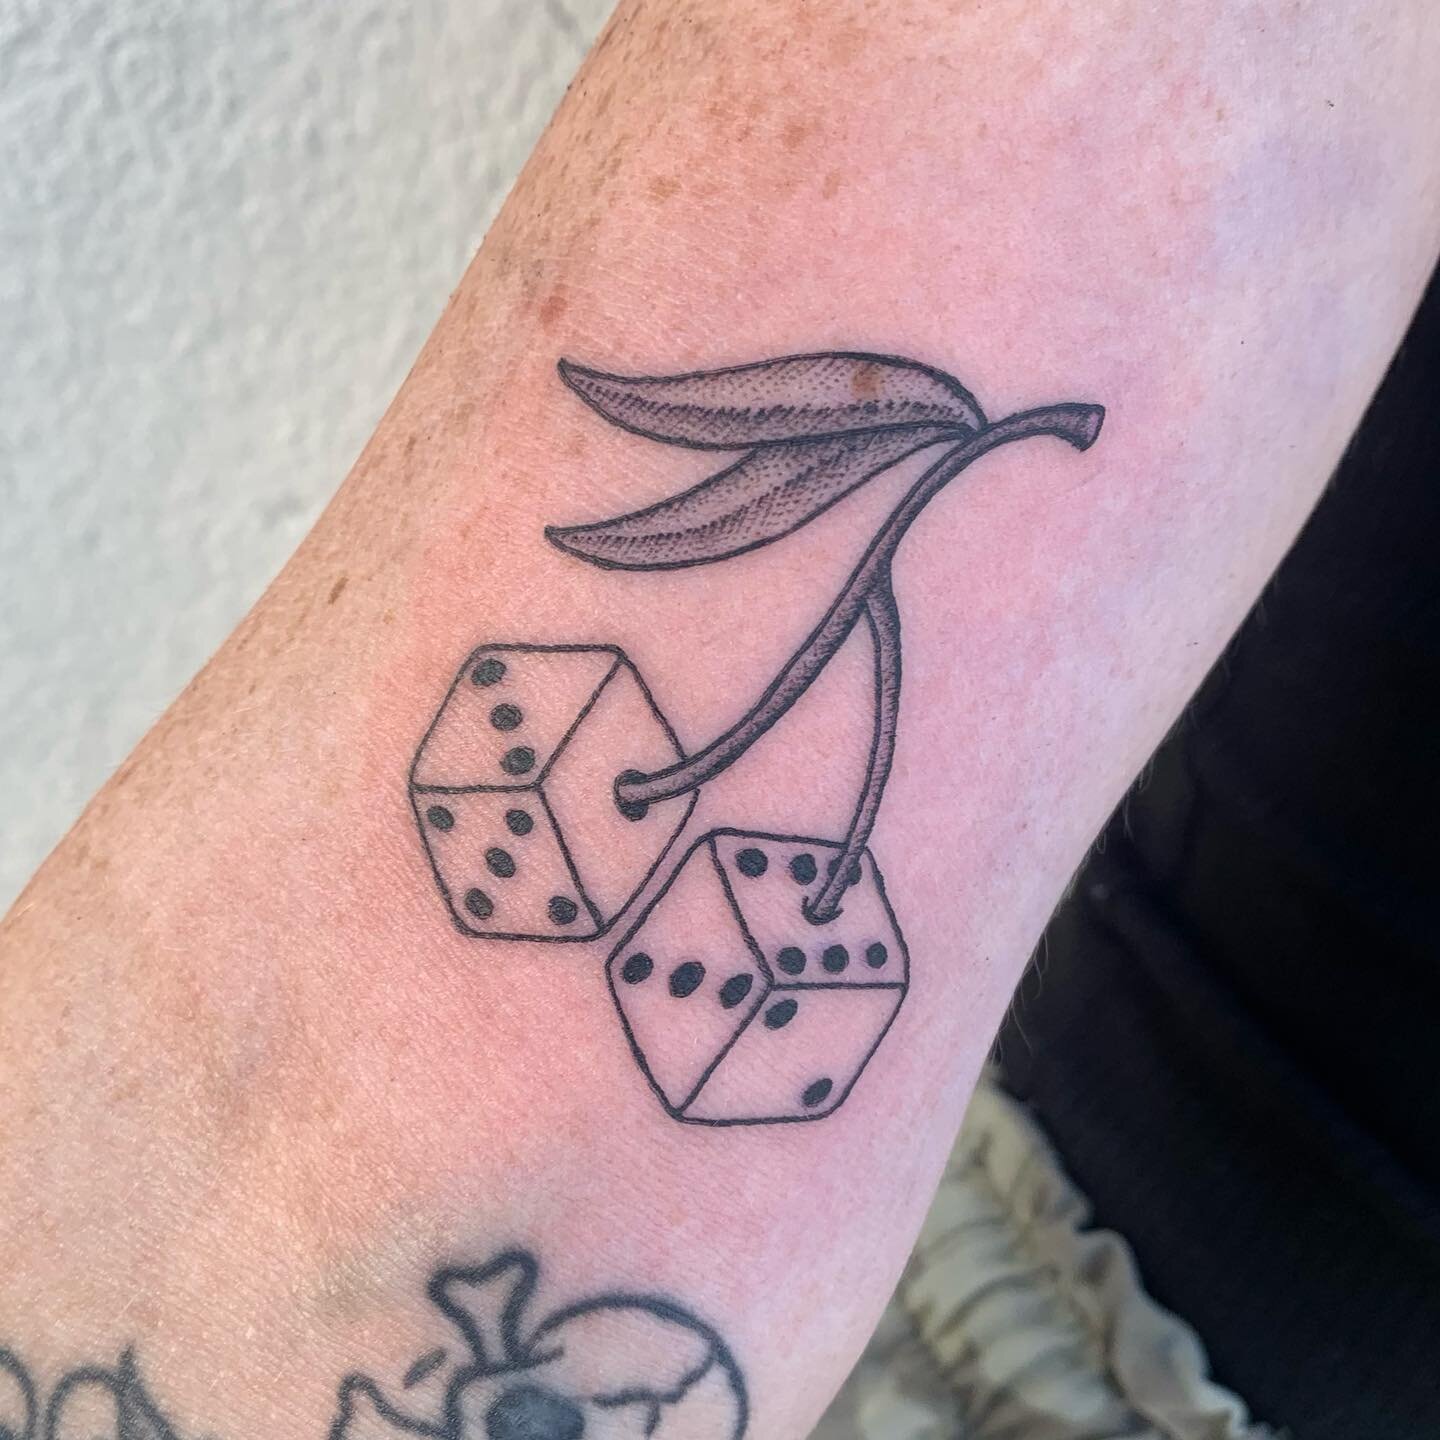 Deathly hallows by Steph at Cherry Tattoo company in Williamsport Pa  r tattoos